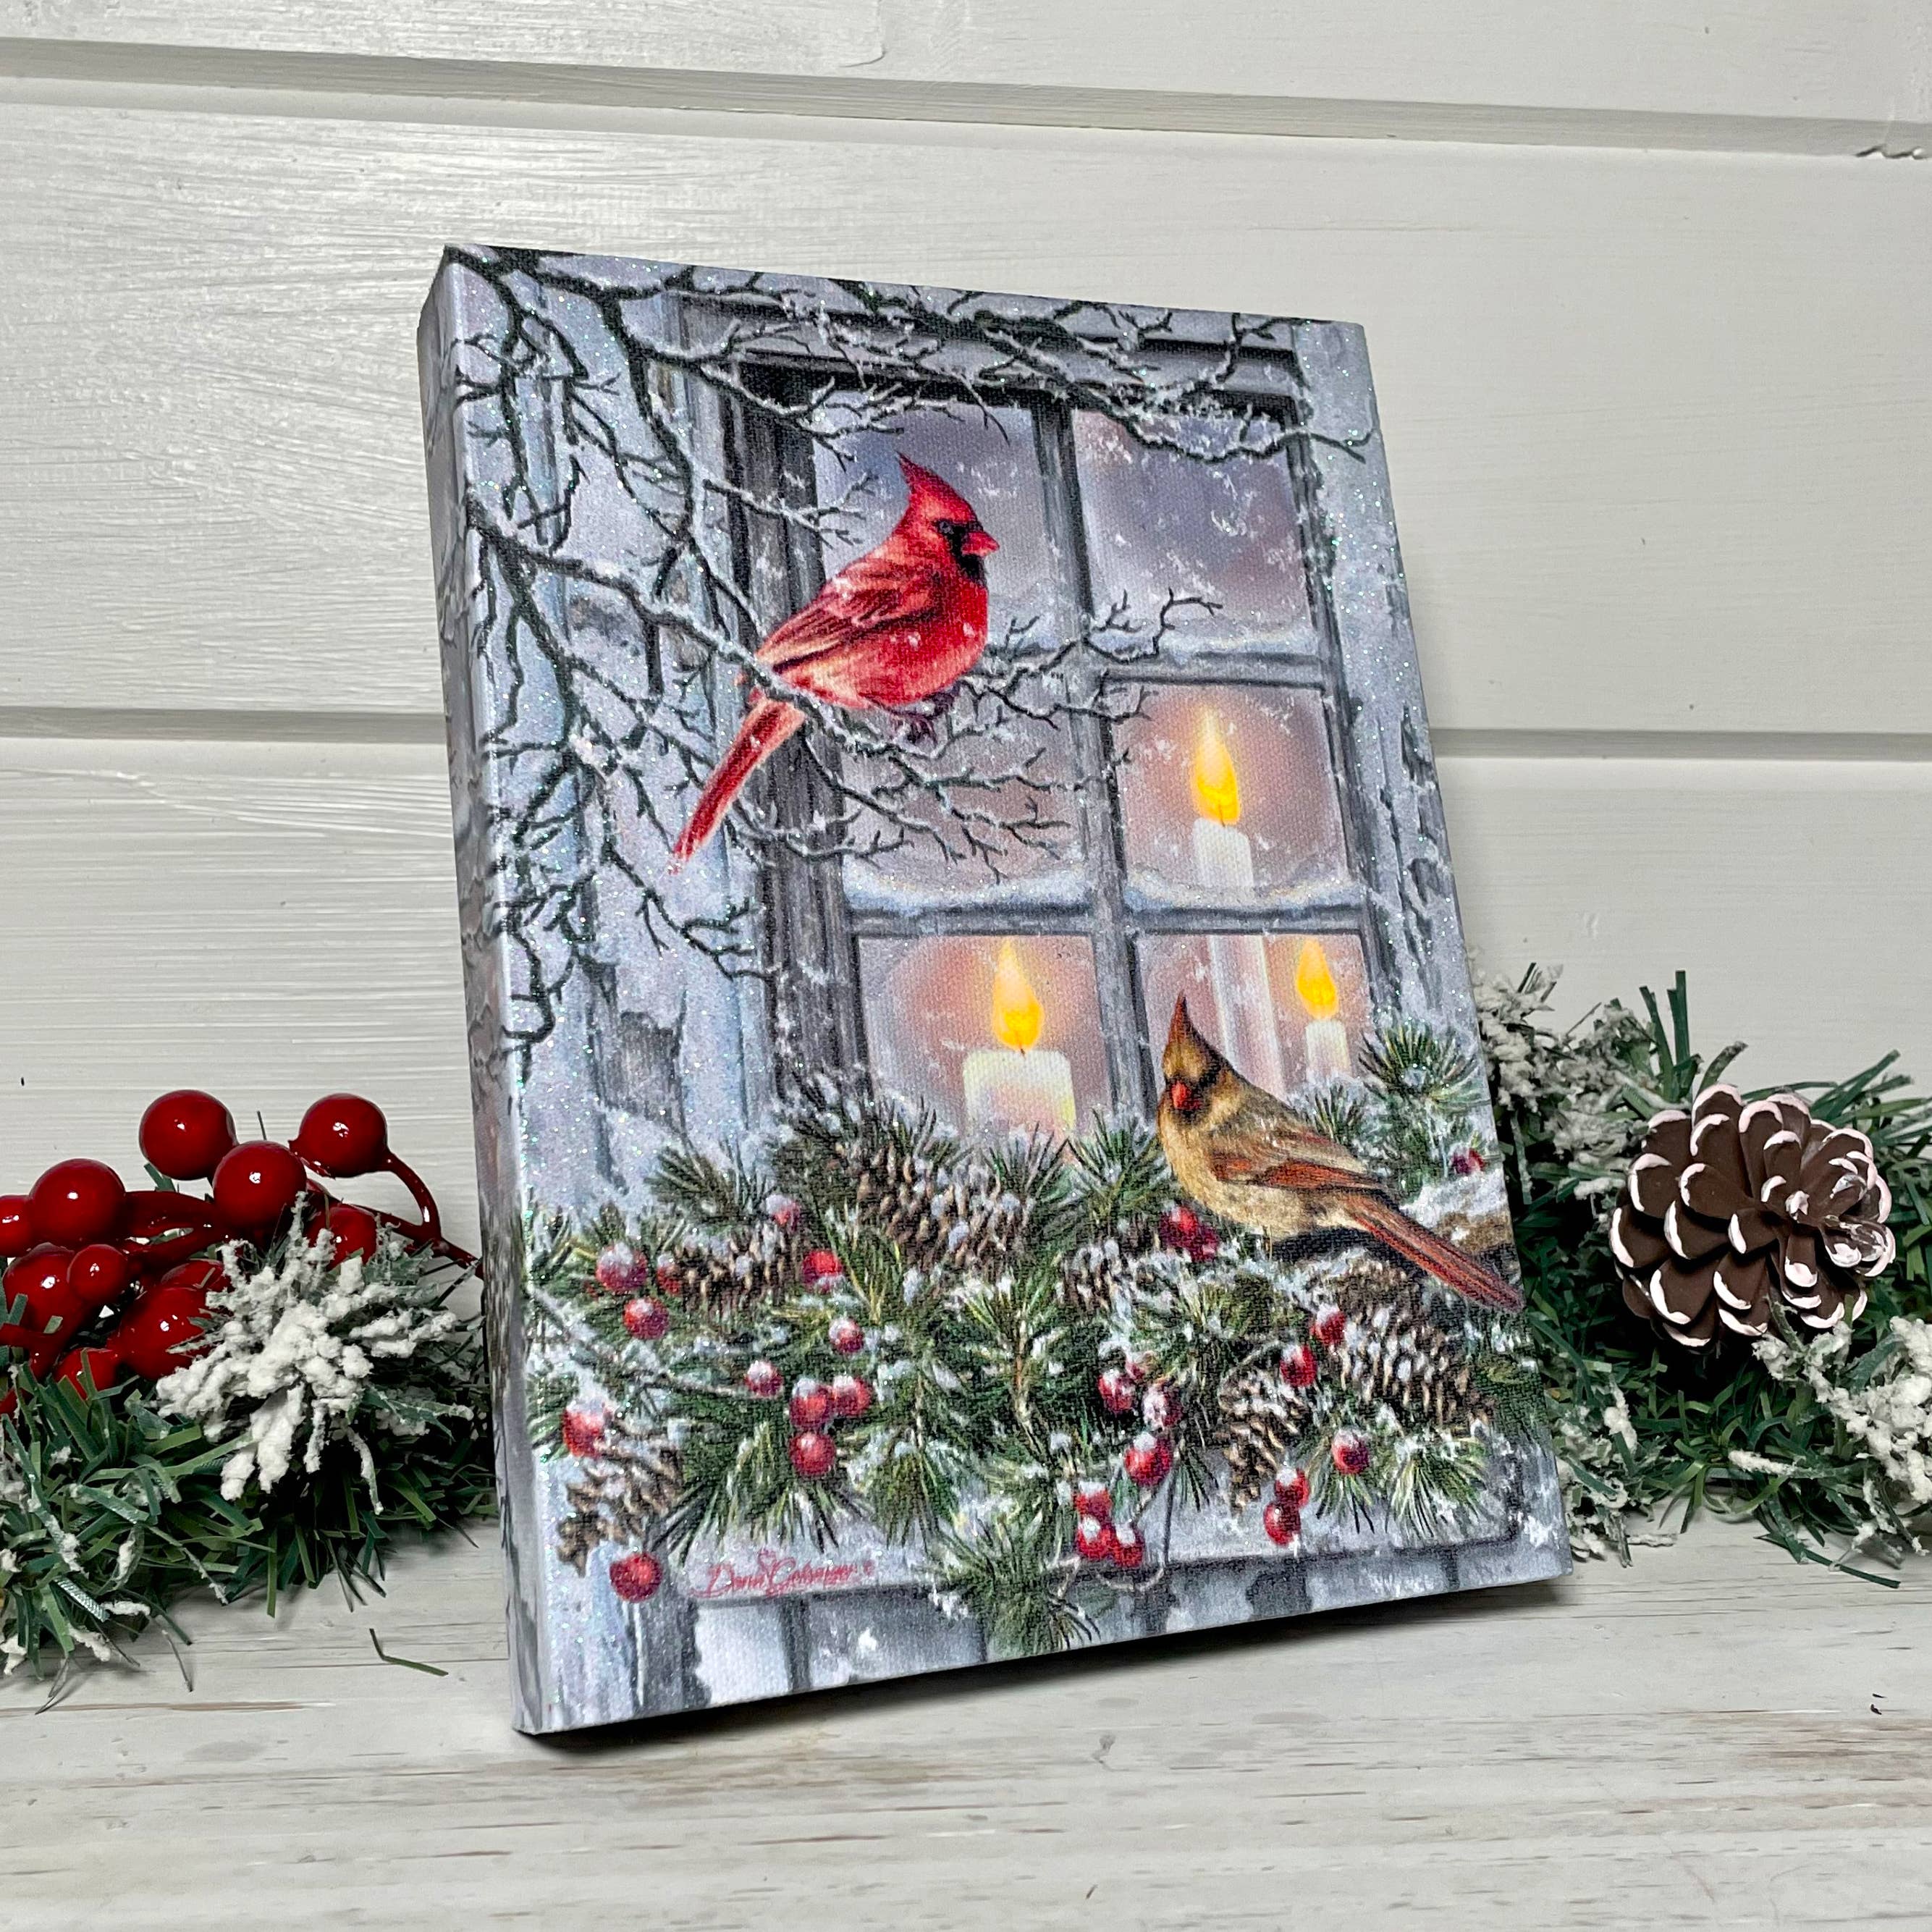 Together for Christmas 8x6 Lighted Tabletop Canvas A2126